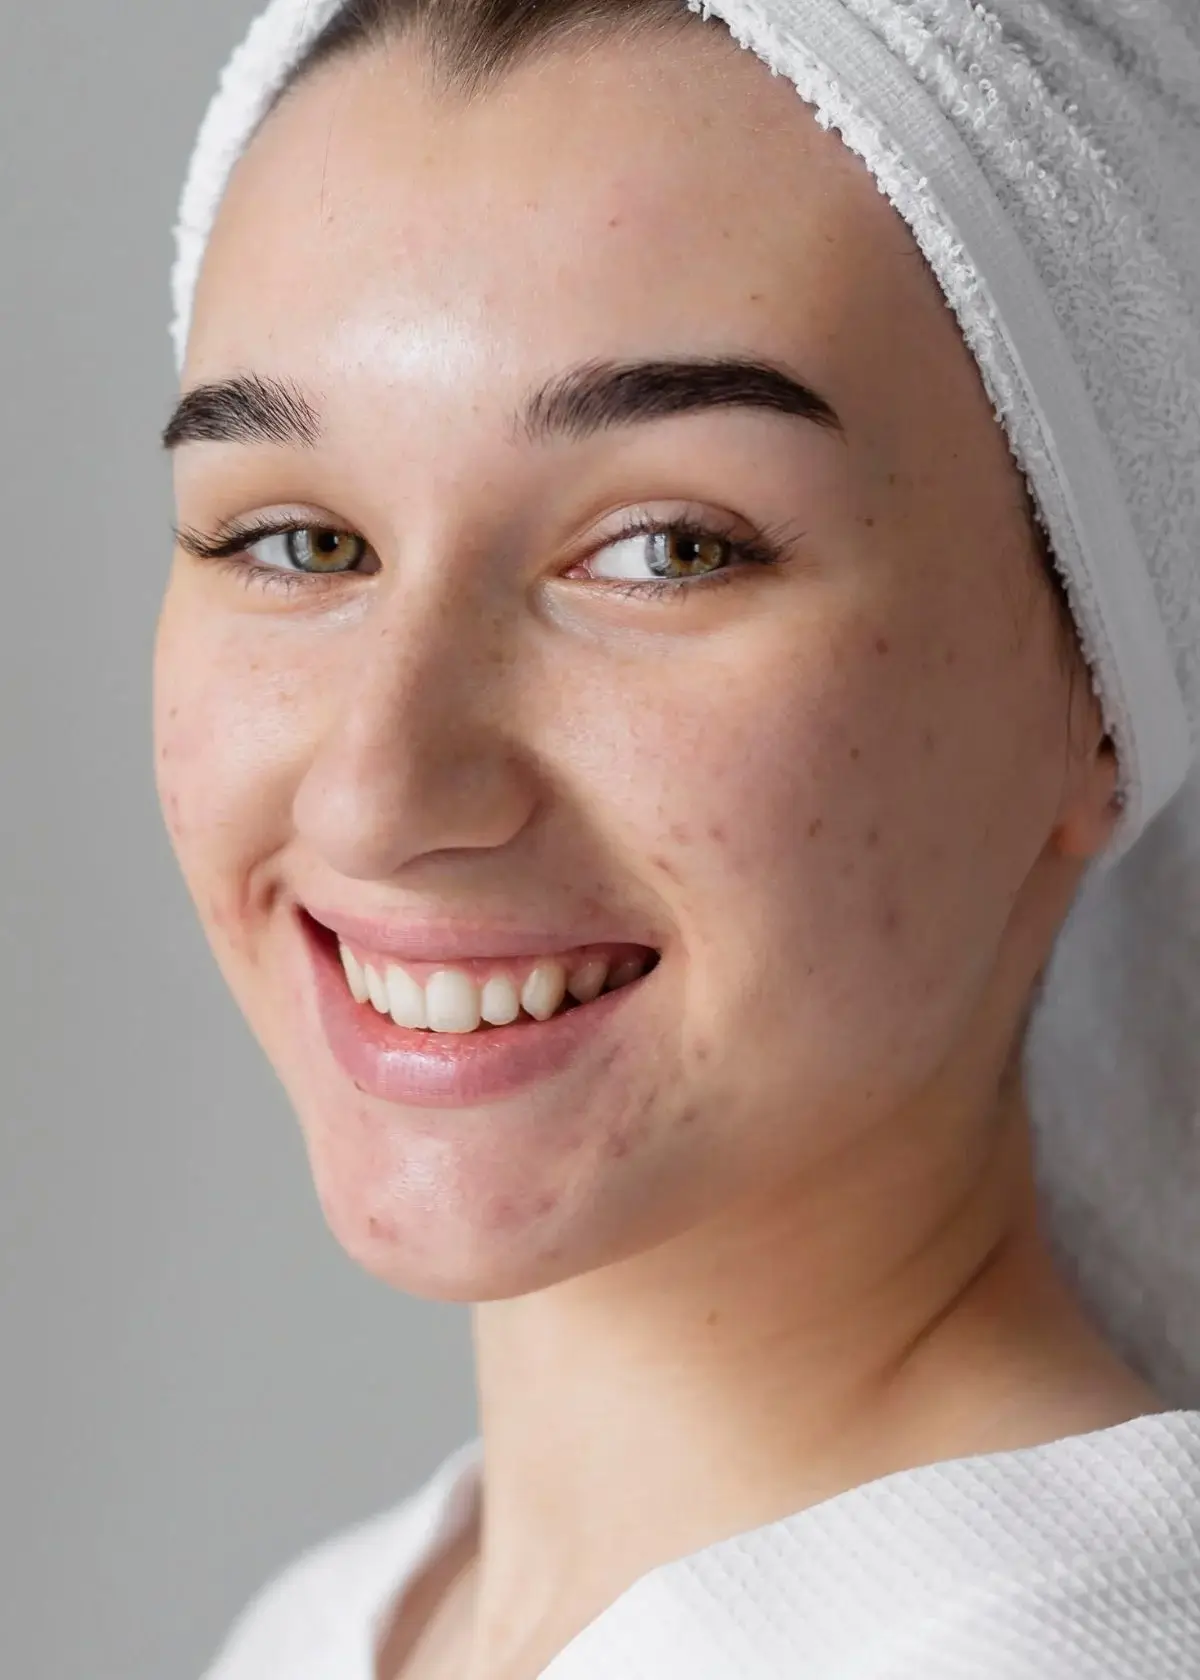 Are there any age restrictions for hormonal acne treatments?